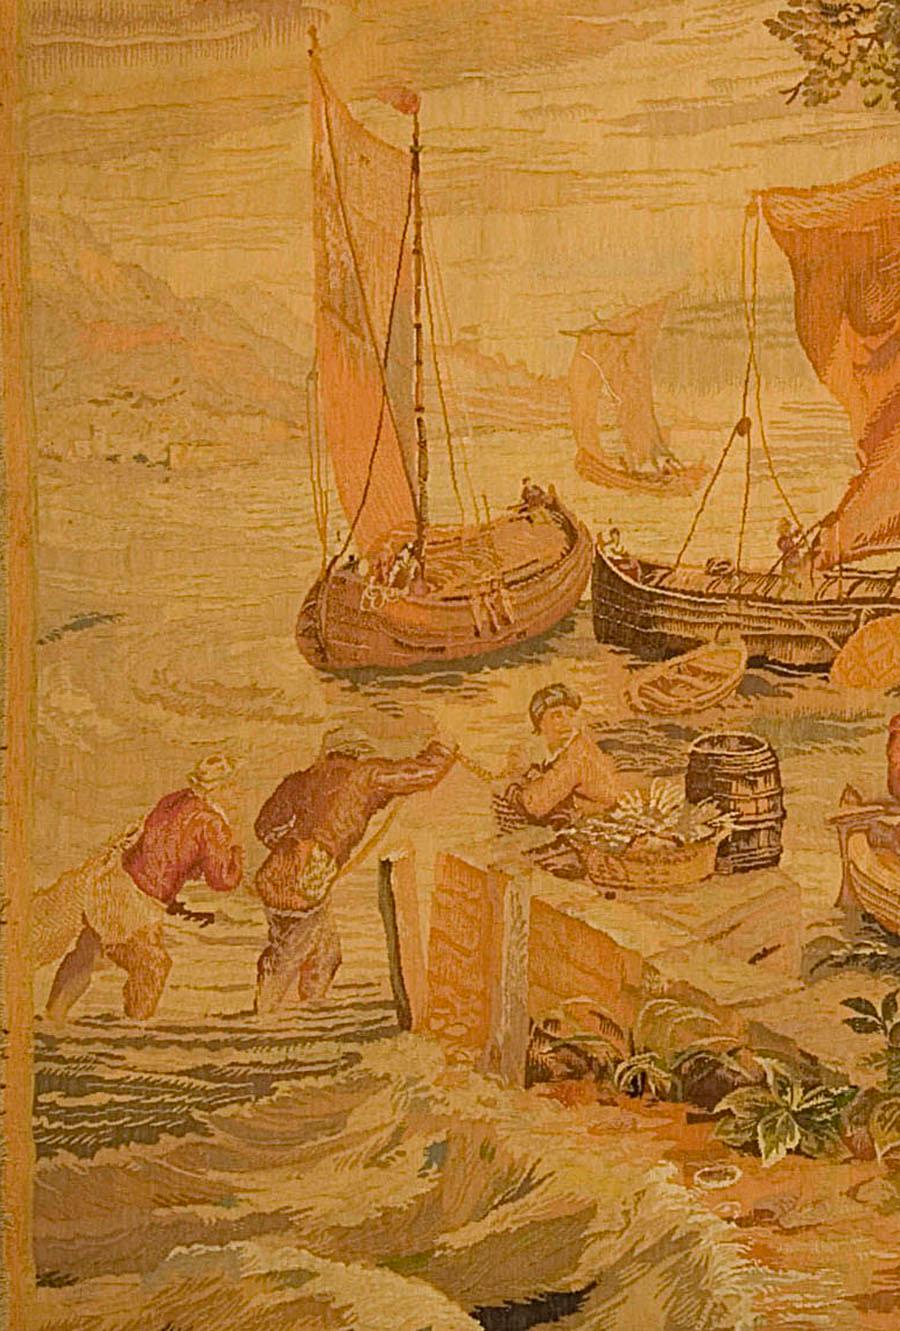 French 19th century tapestry, circa 1890. French 19th century hand-loomed tapestry. An idyllic scene of fisherman and their boats bringing in the catch at the end of the day. Size: 6'6 x 7'3 wide.